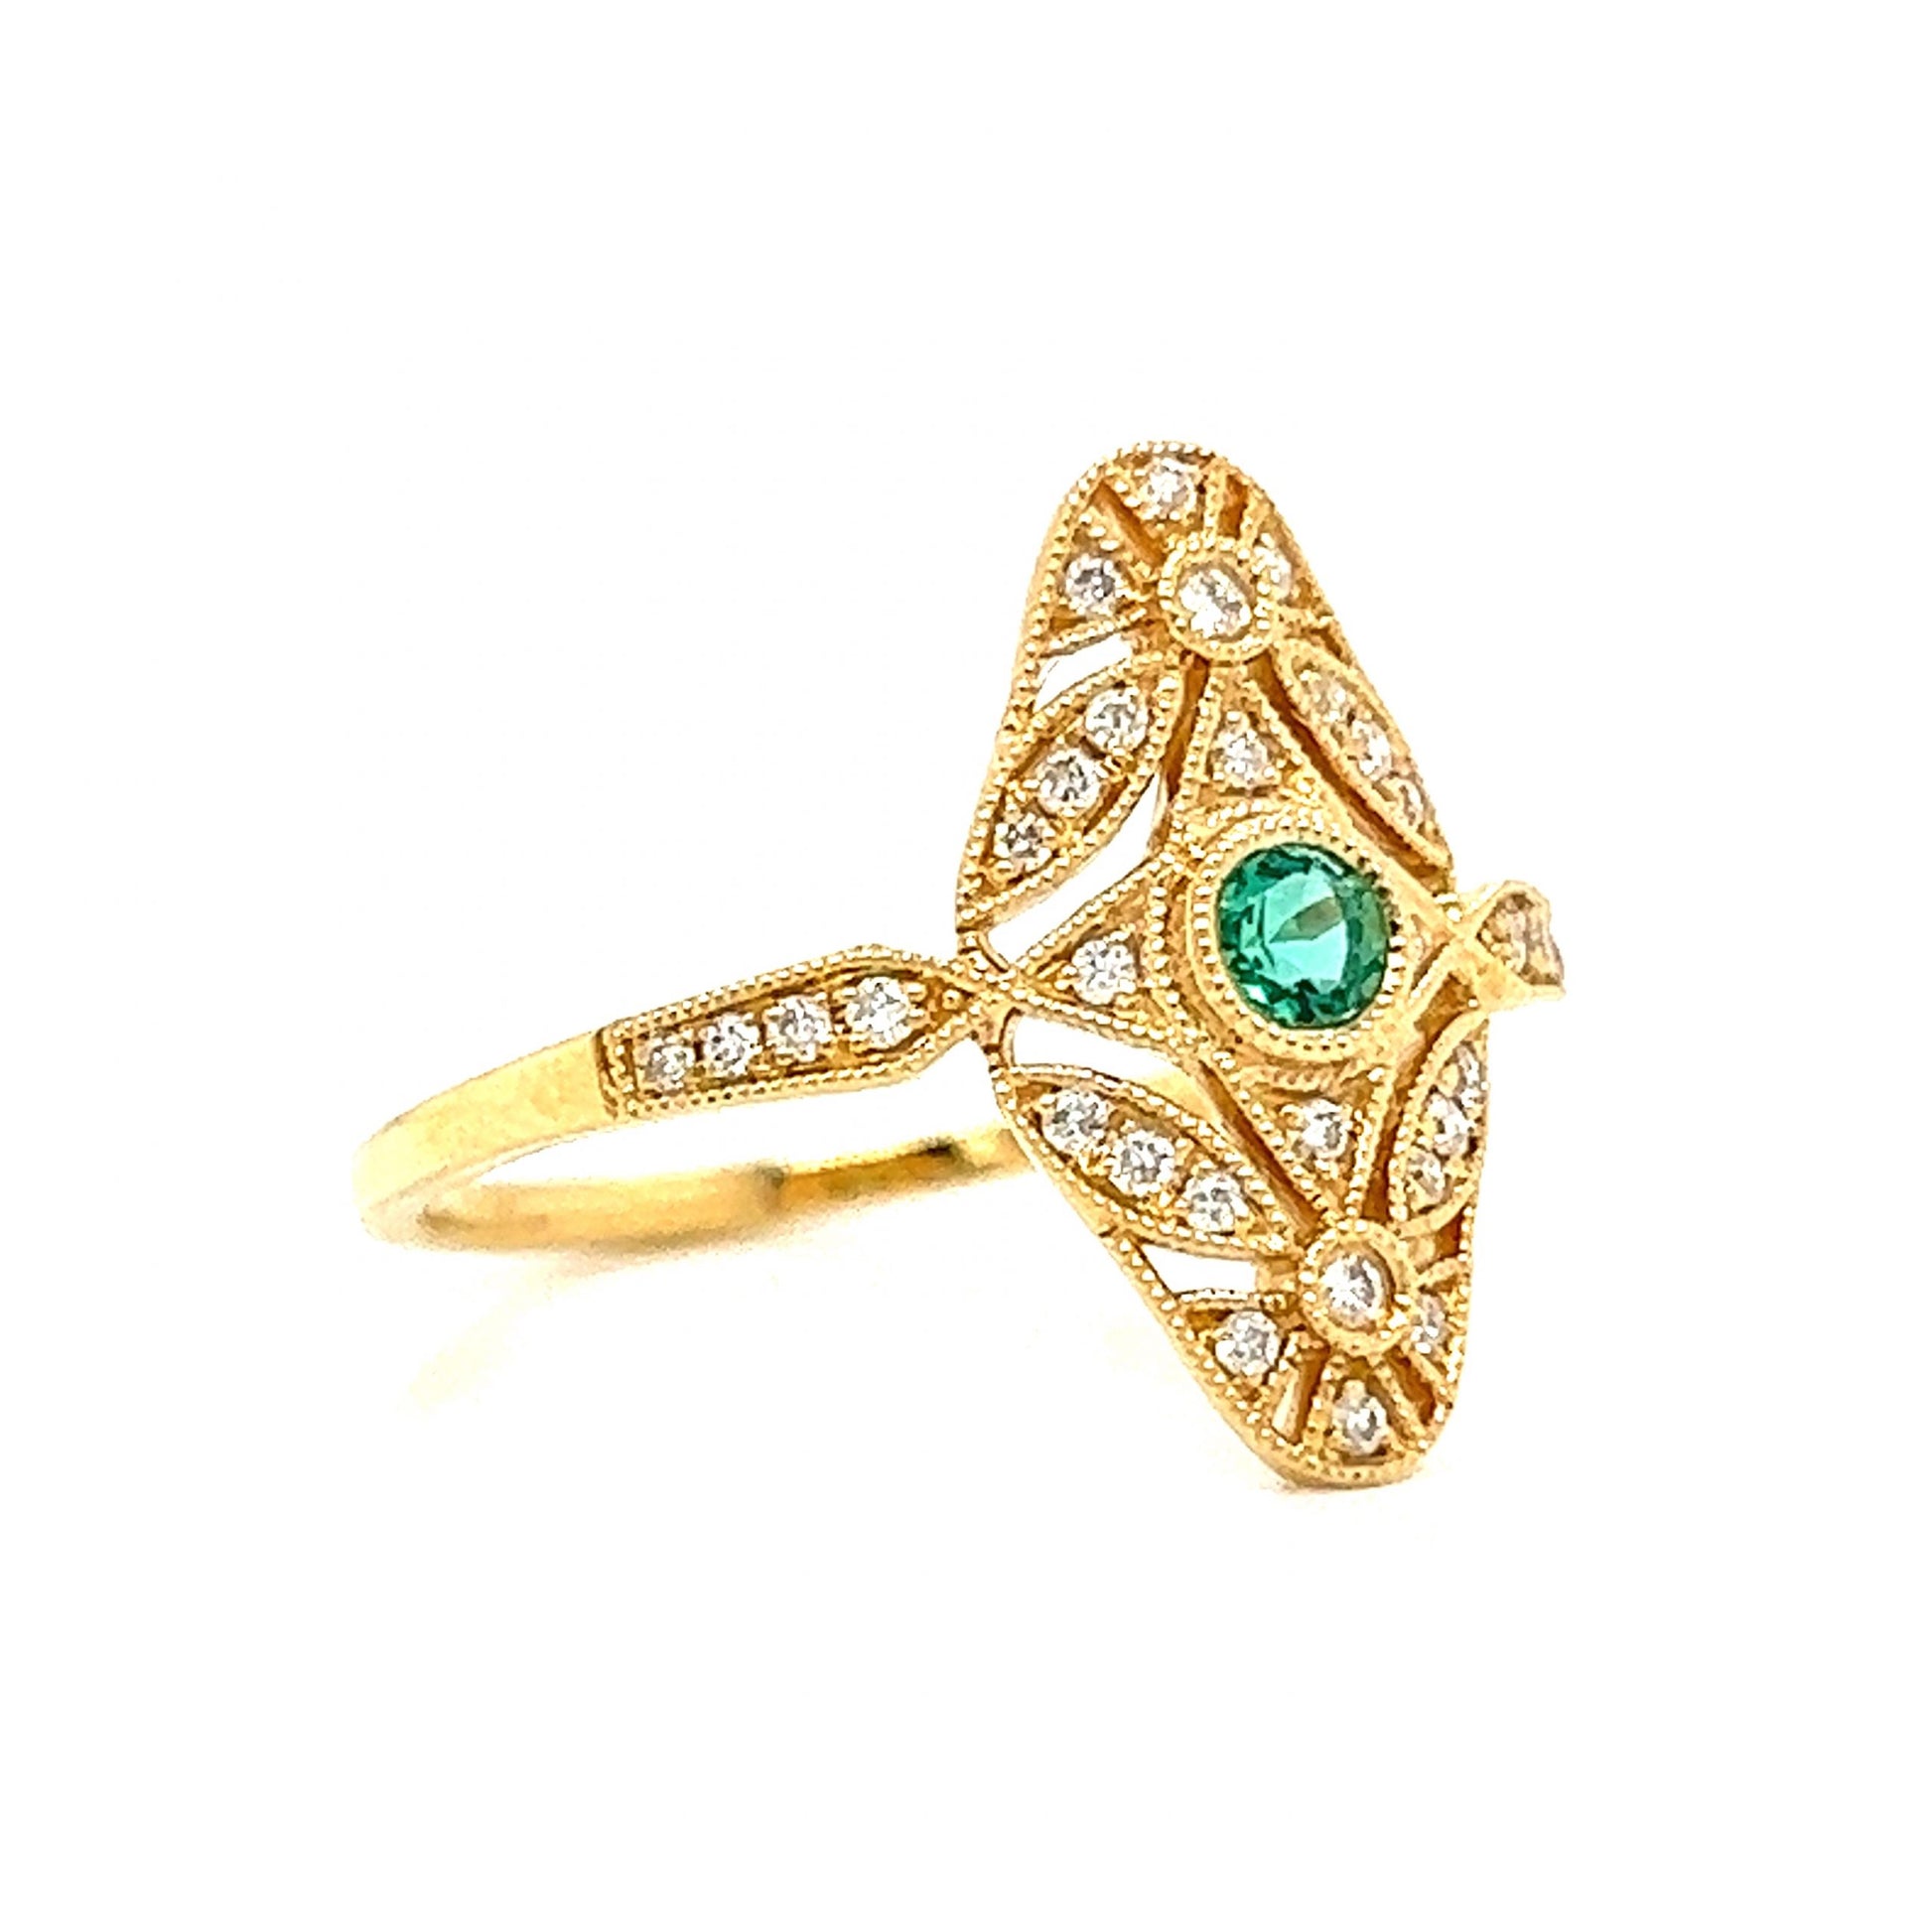 Antique Inspired Round Emerald & Diamond Ring in 18k GoldComposition: 18 Karat Yellow GoldRing Size: 6.5Total Diamond Weight: .15 ctTotal Gram Weight: 2.4 gInscription: JHK 18k